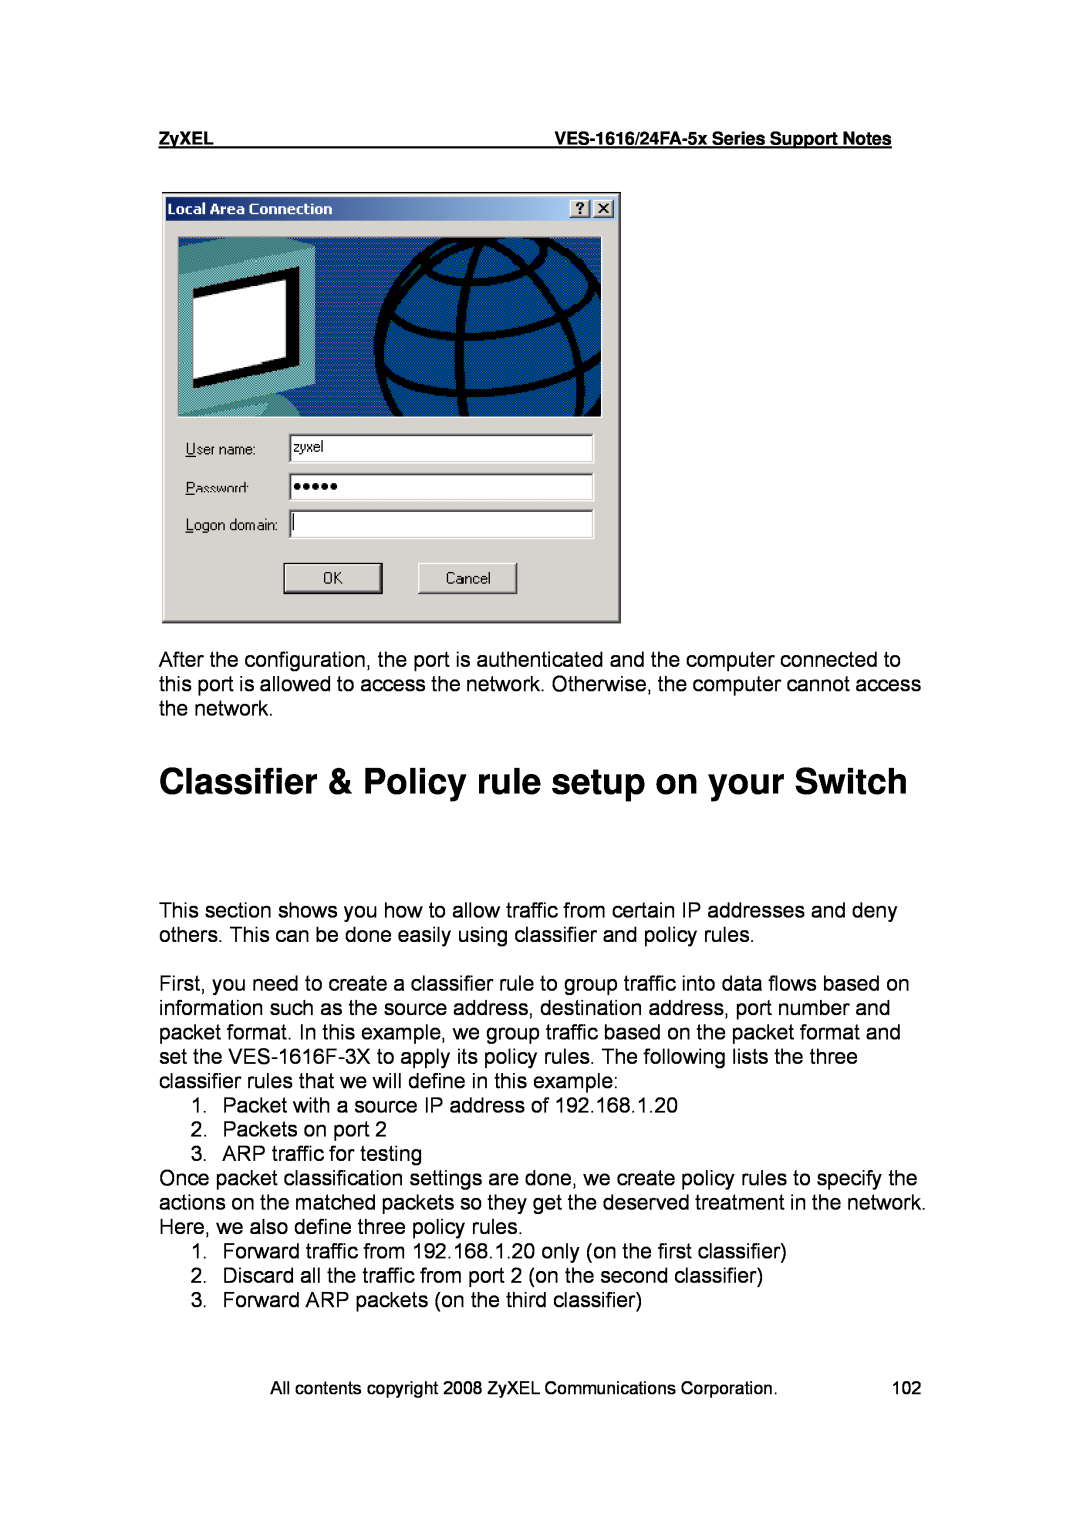 ZyXEL Communications VES-1616 manual Classifier & Policy rule setup on your Switch 